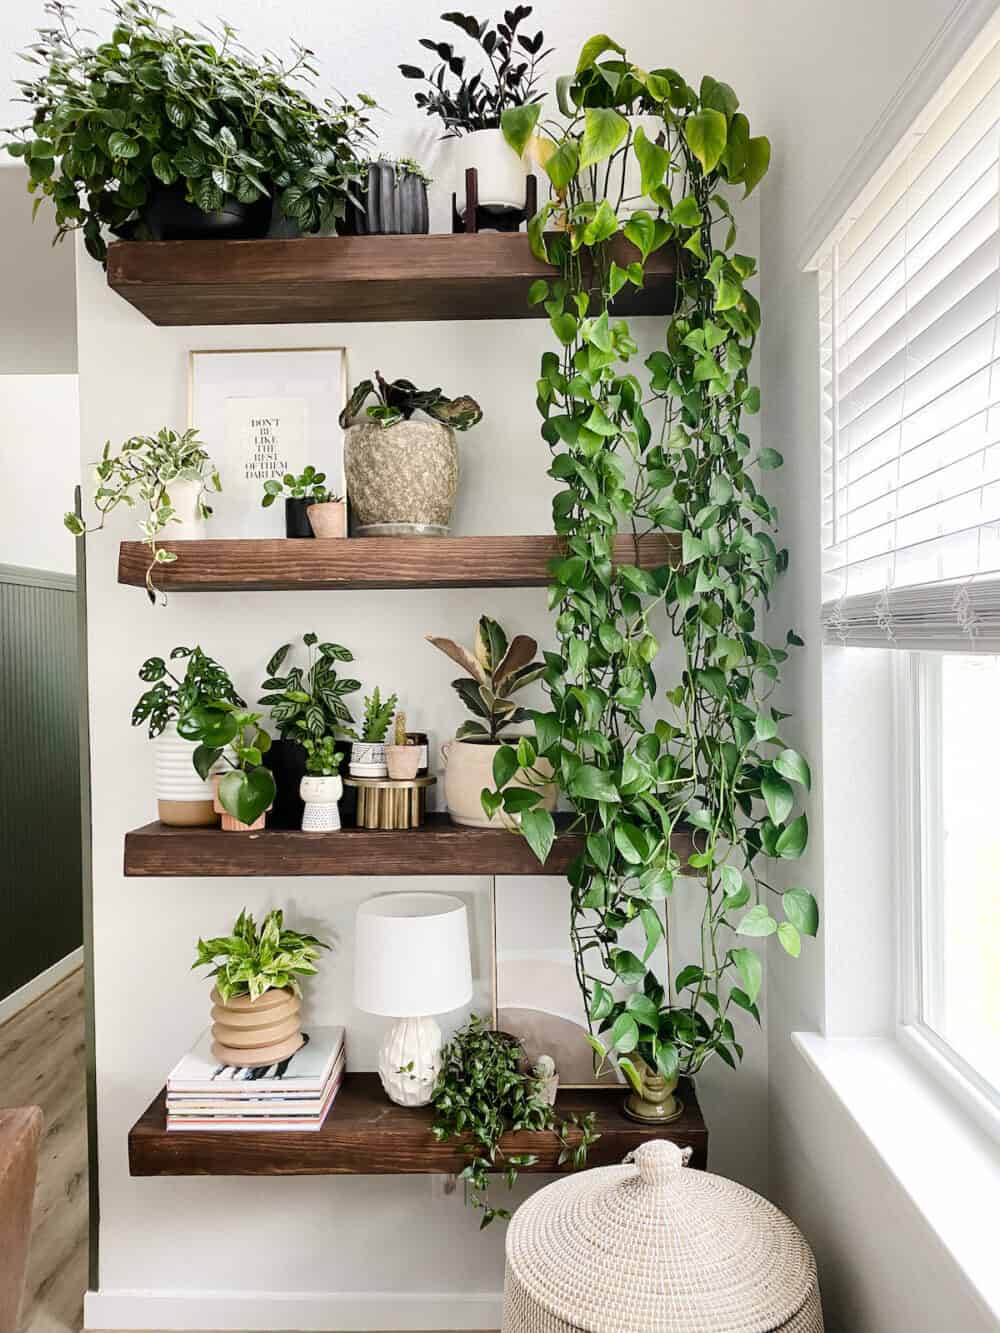 A set of floating shelves filled with plants